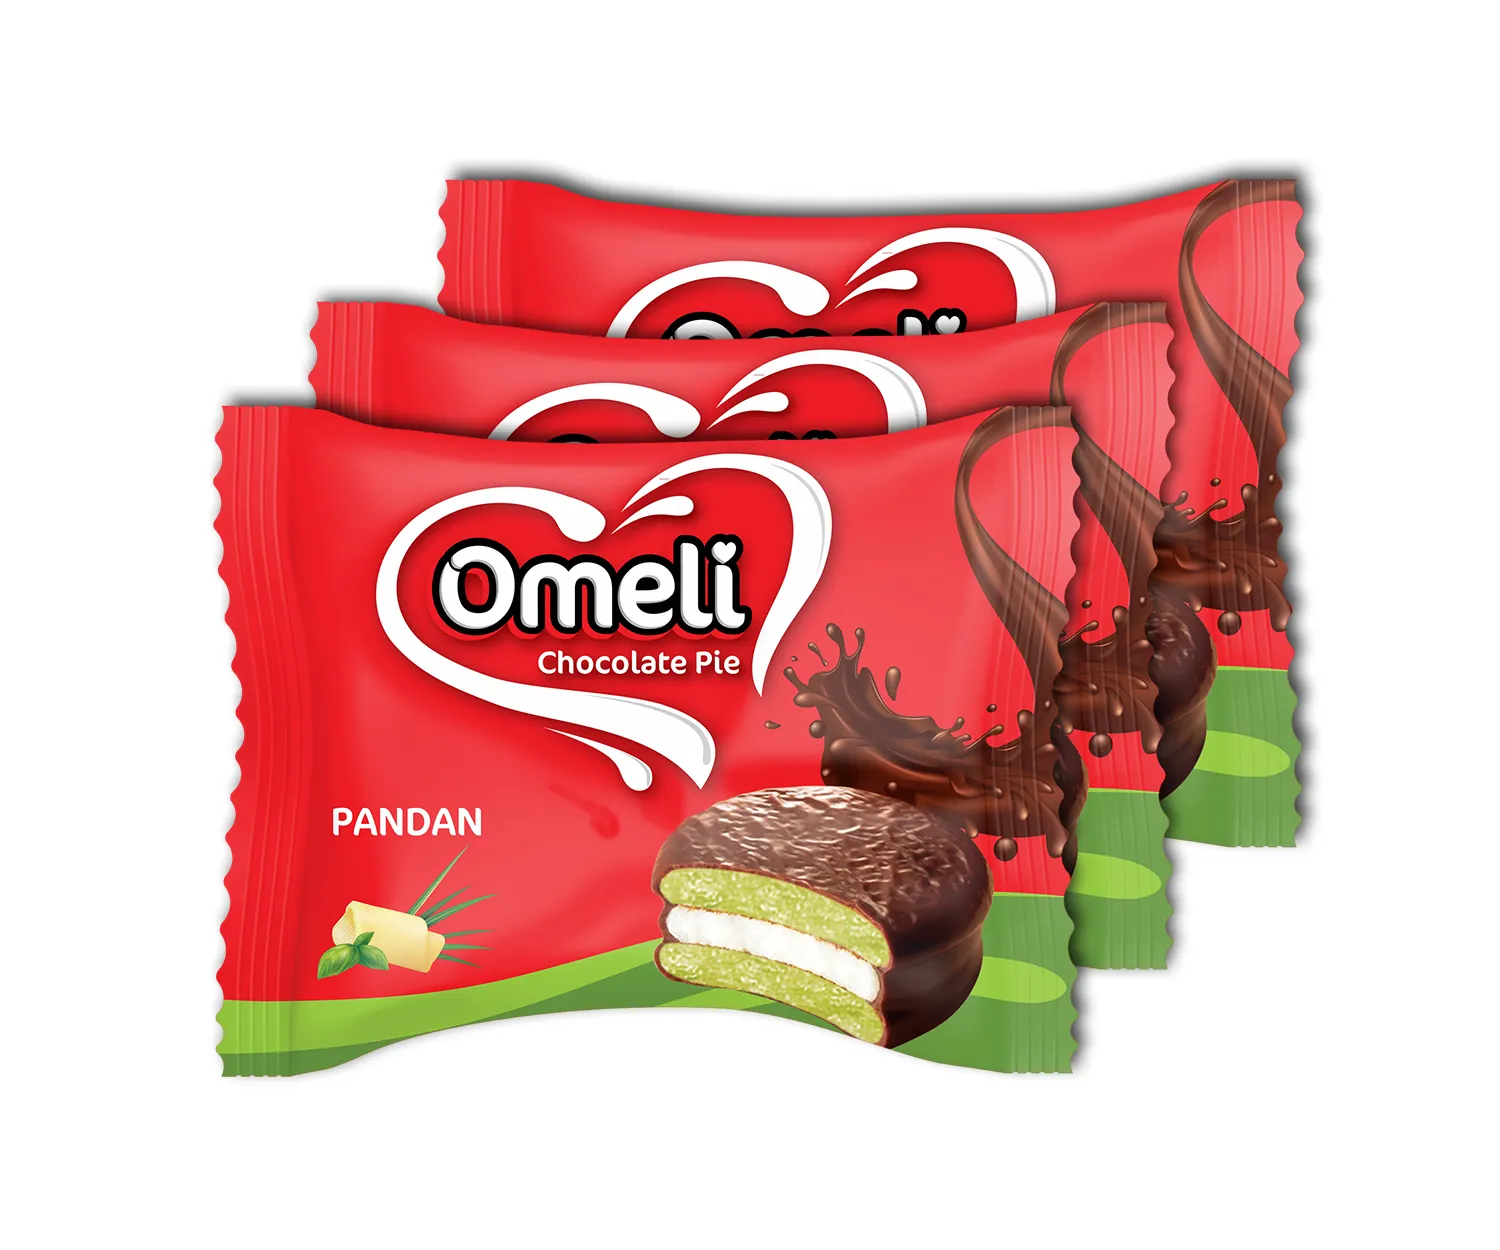 Premium Quality New Product Omeli chocolate pie / Chocopie 150gr, Pandan Flavour - Stored in Paper Box